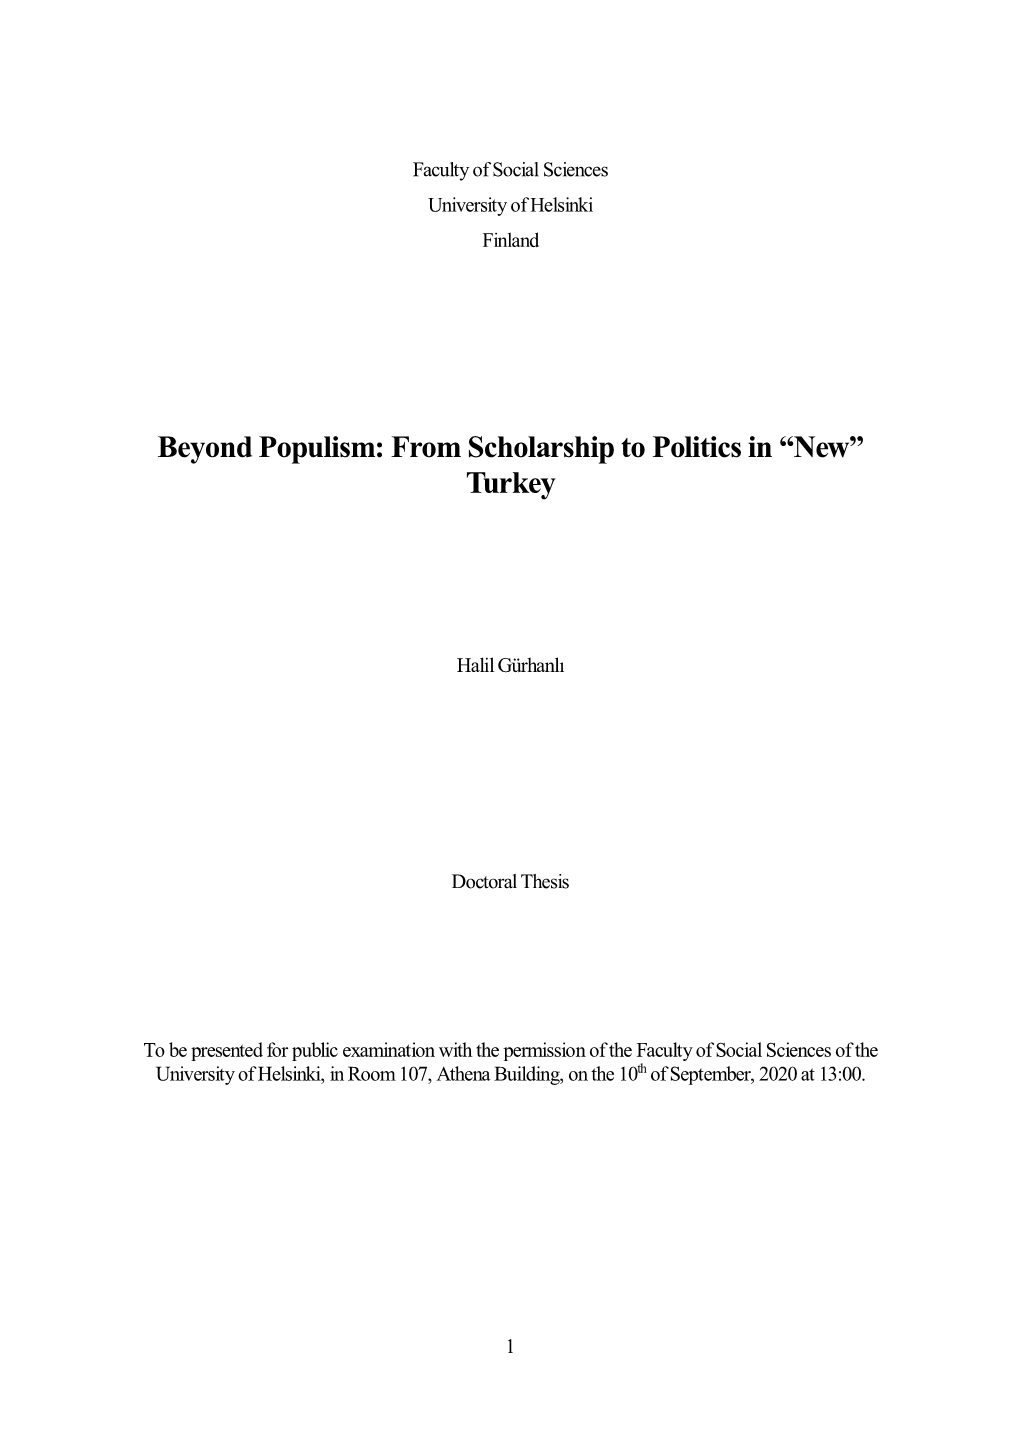 Beyond Populism: from Scholarship to Politics in “New” Turkey